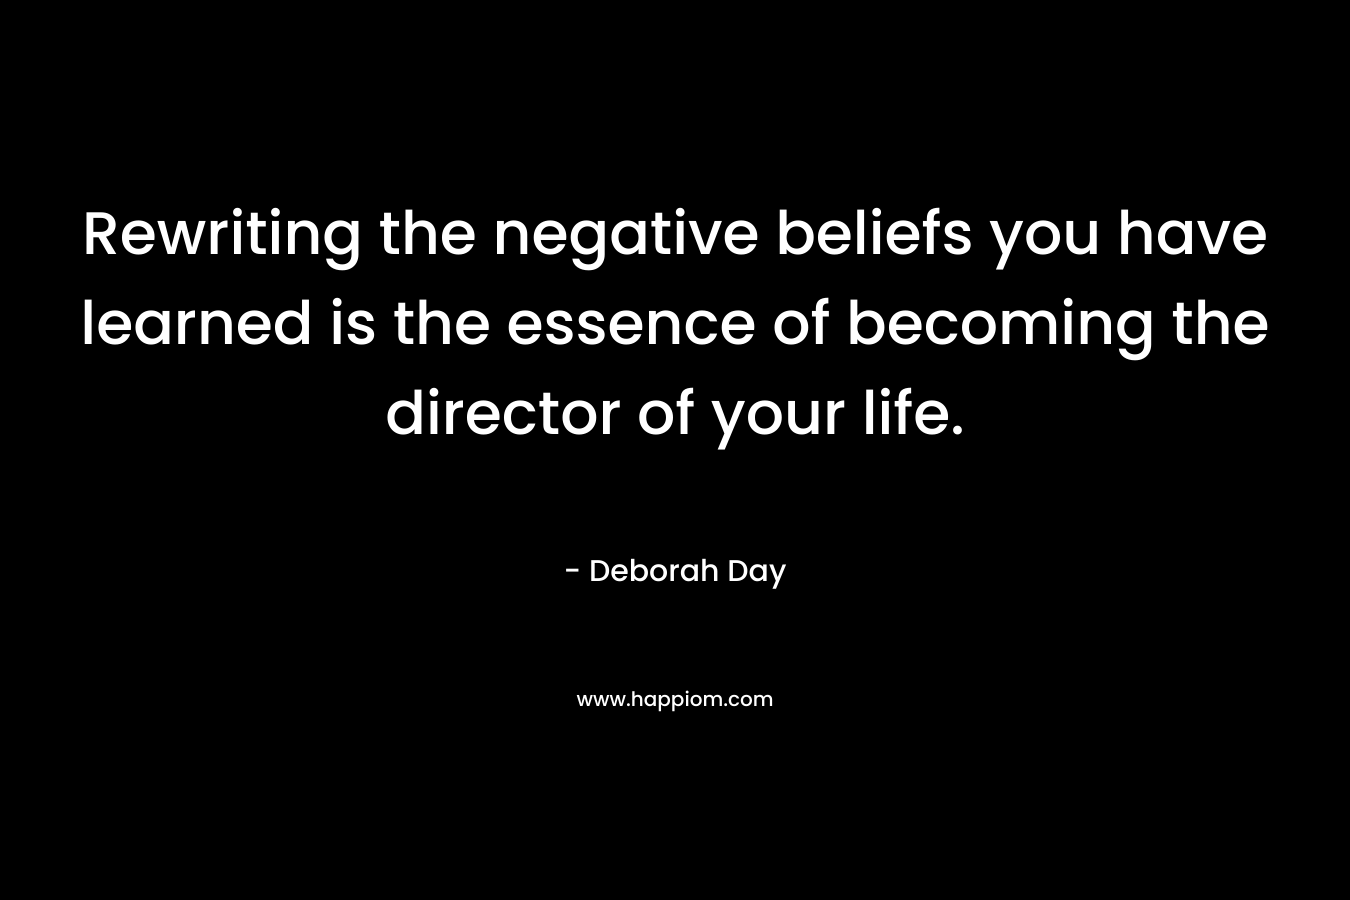 Rewriting the negative beliefs you have learned is the essence of becoming the director of your life.